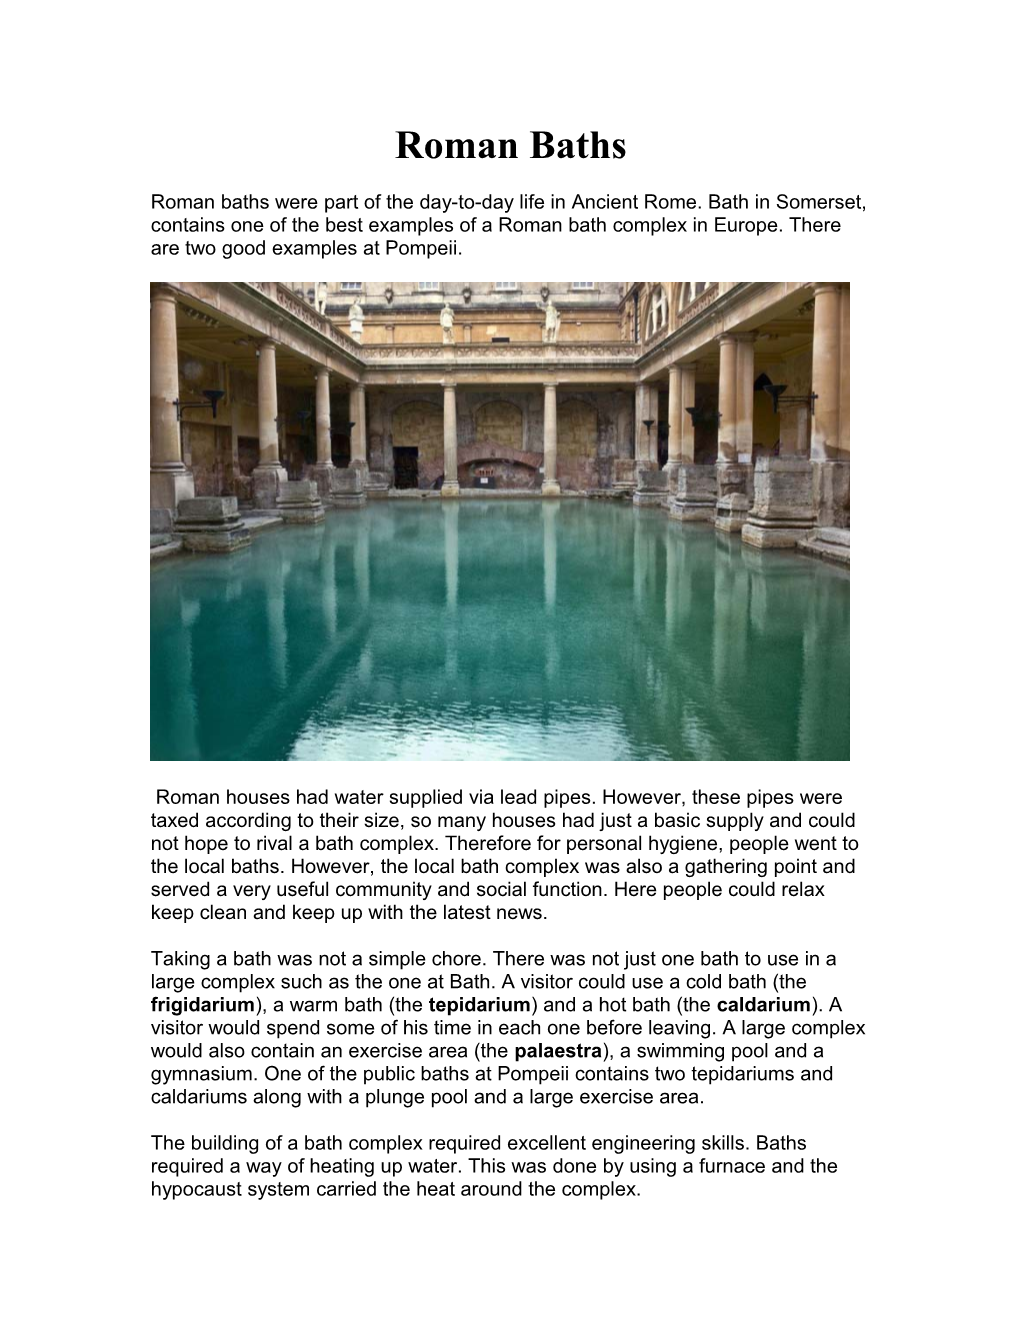 Roman Baths Were Part of the Day-To-Day Life in Ancient Rome. Bath in Somerset, Contains